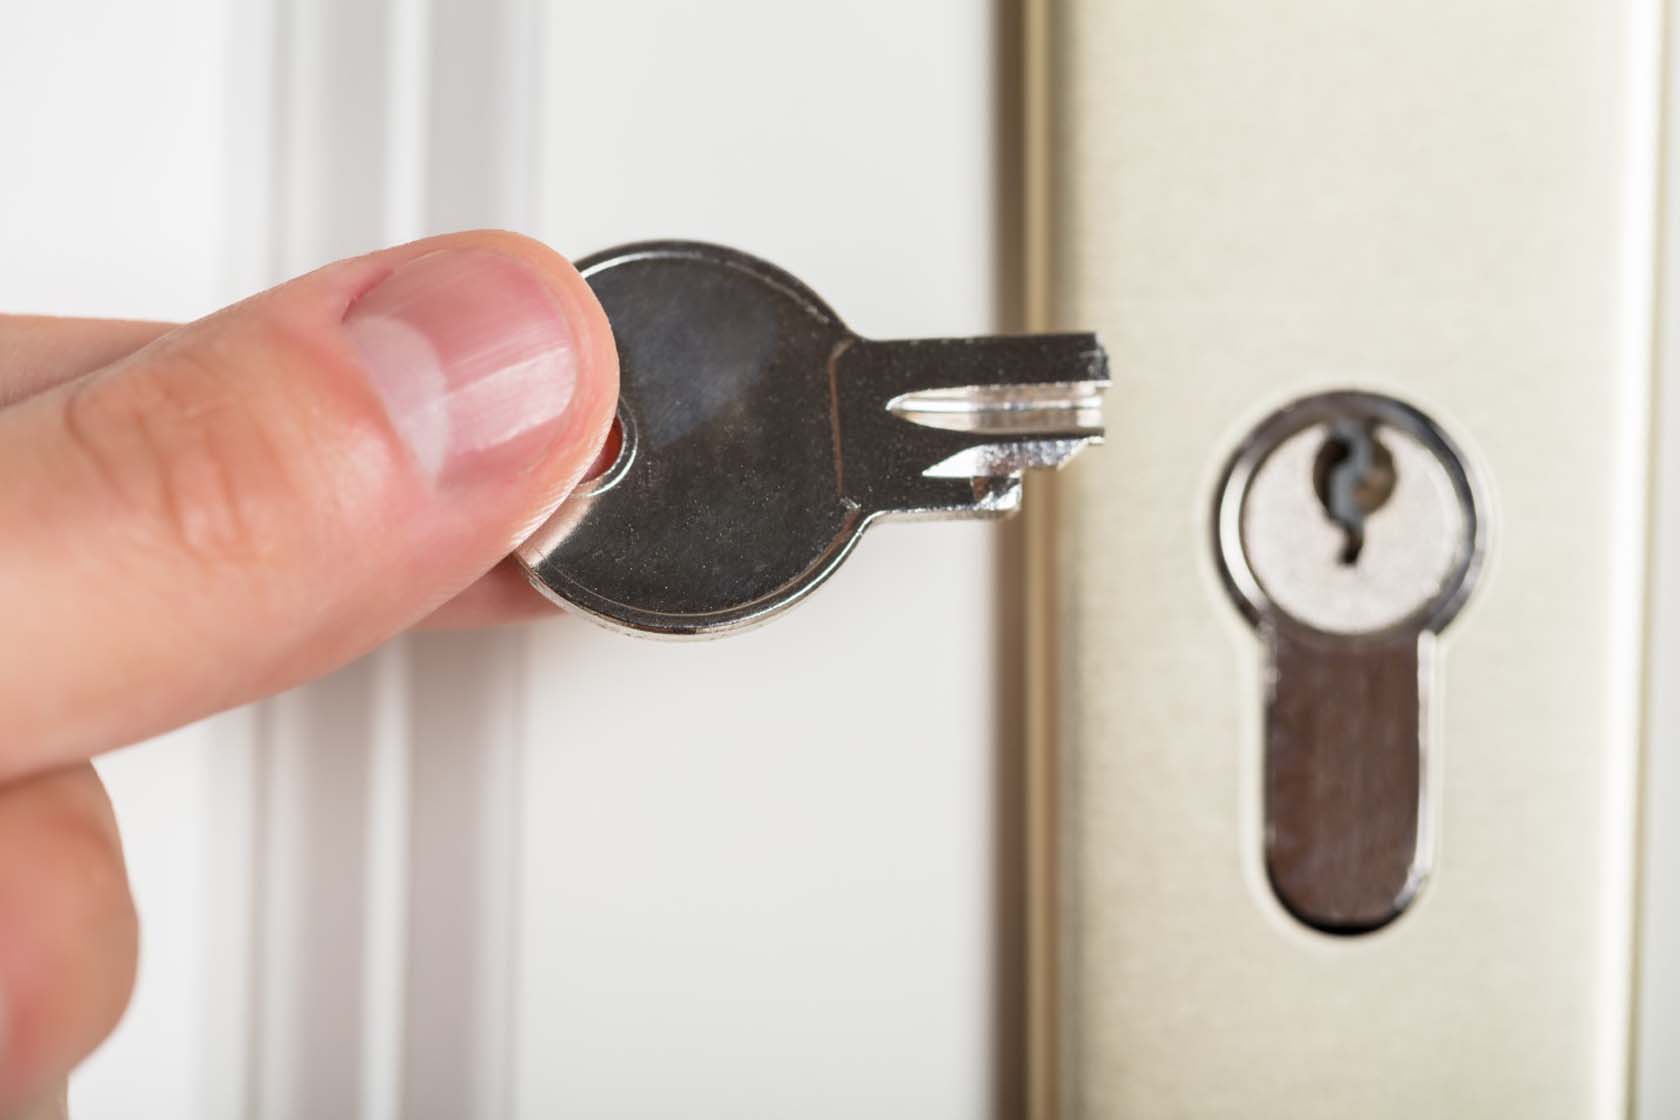 A variety of services are provided by emergency locksmiths